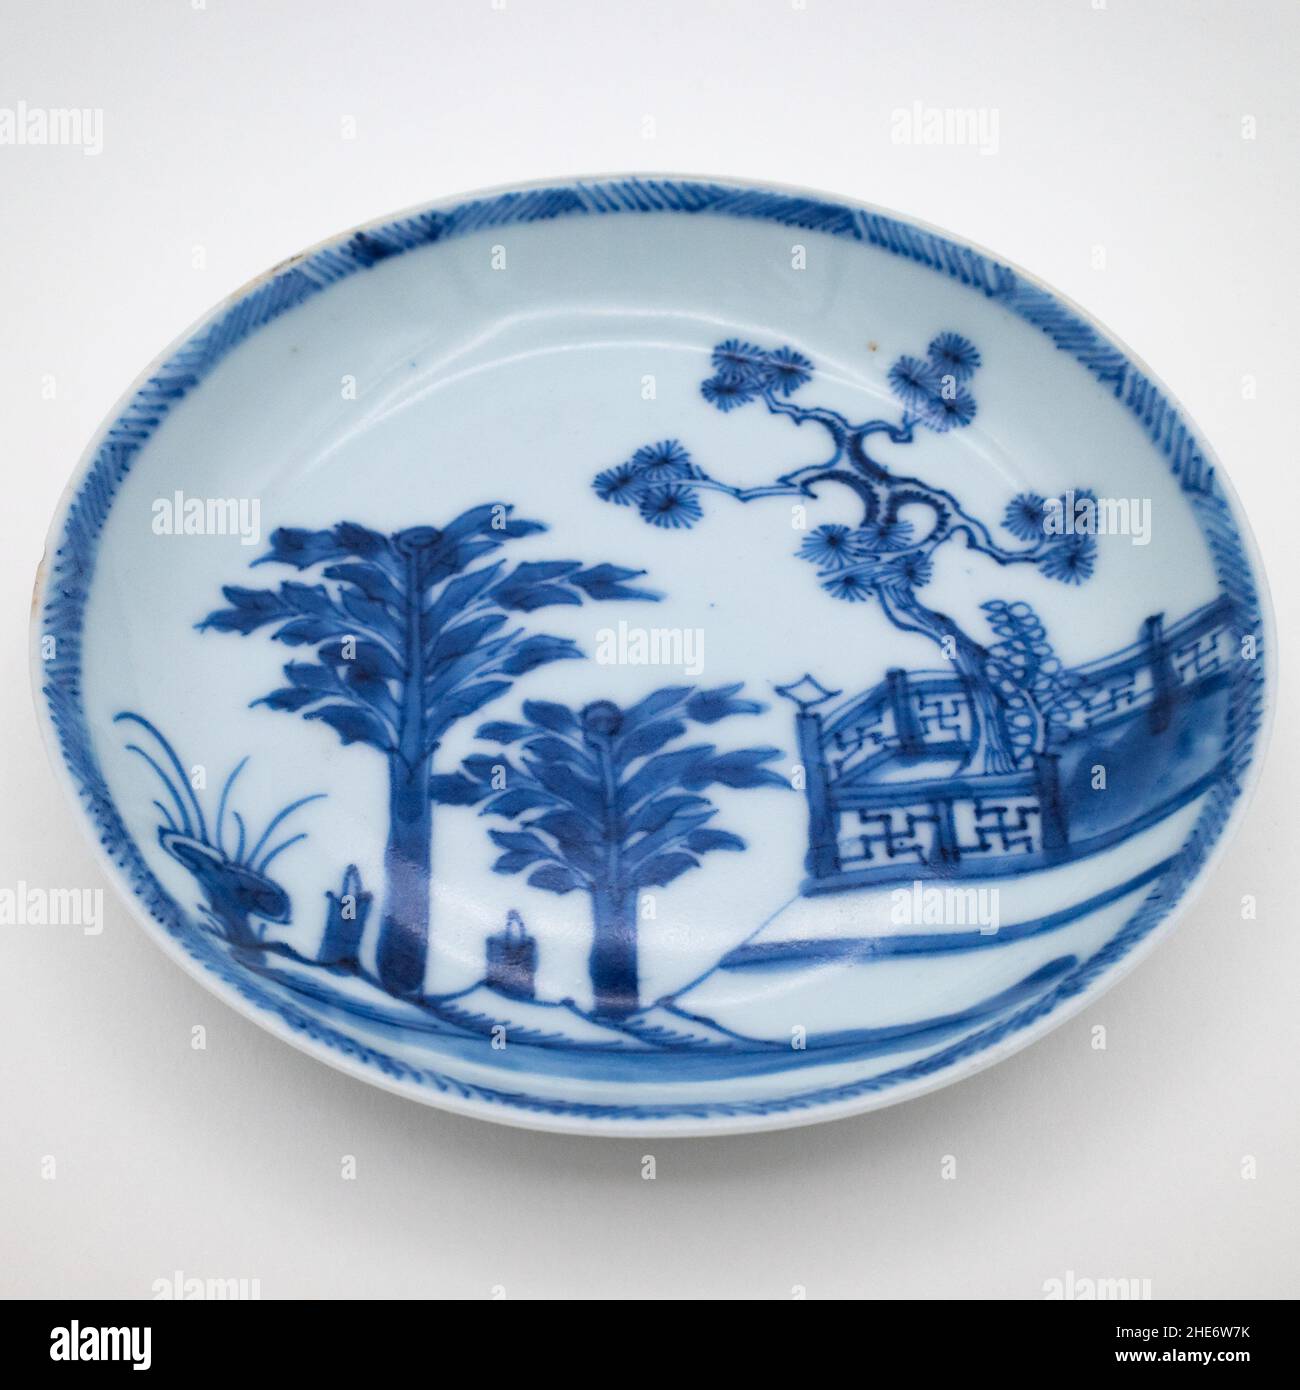 Antique Chinese 18th Century Blue and White Saucer Dish Wih a Scene Featuring Pine Tree Behind a Fence, Plantains and Lingzhi Fungus Stock Photo